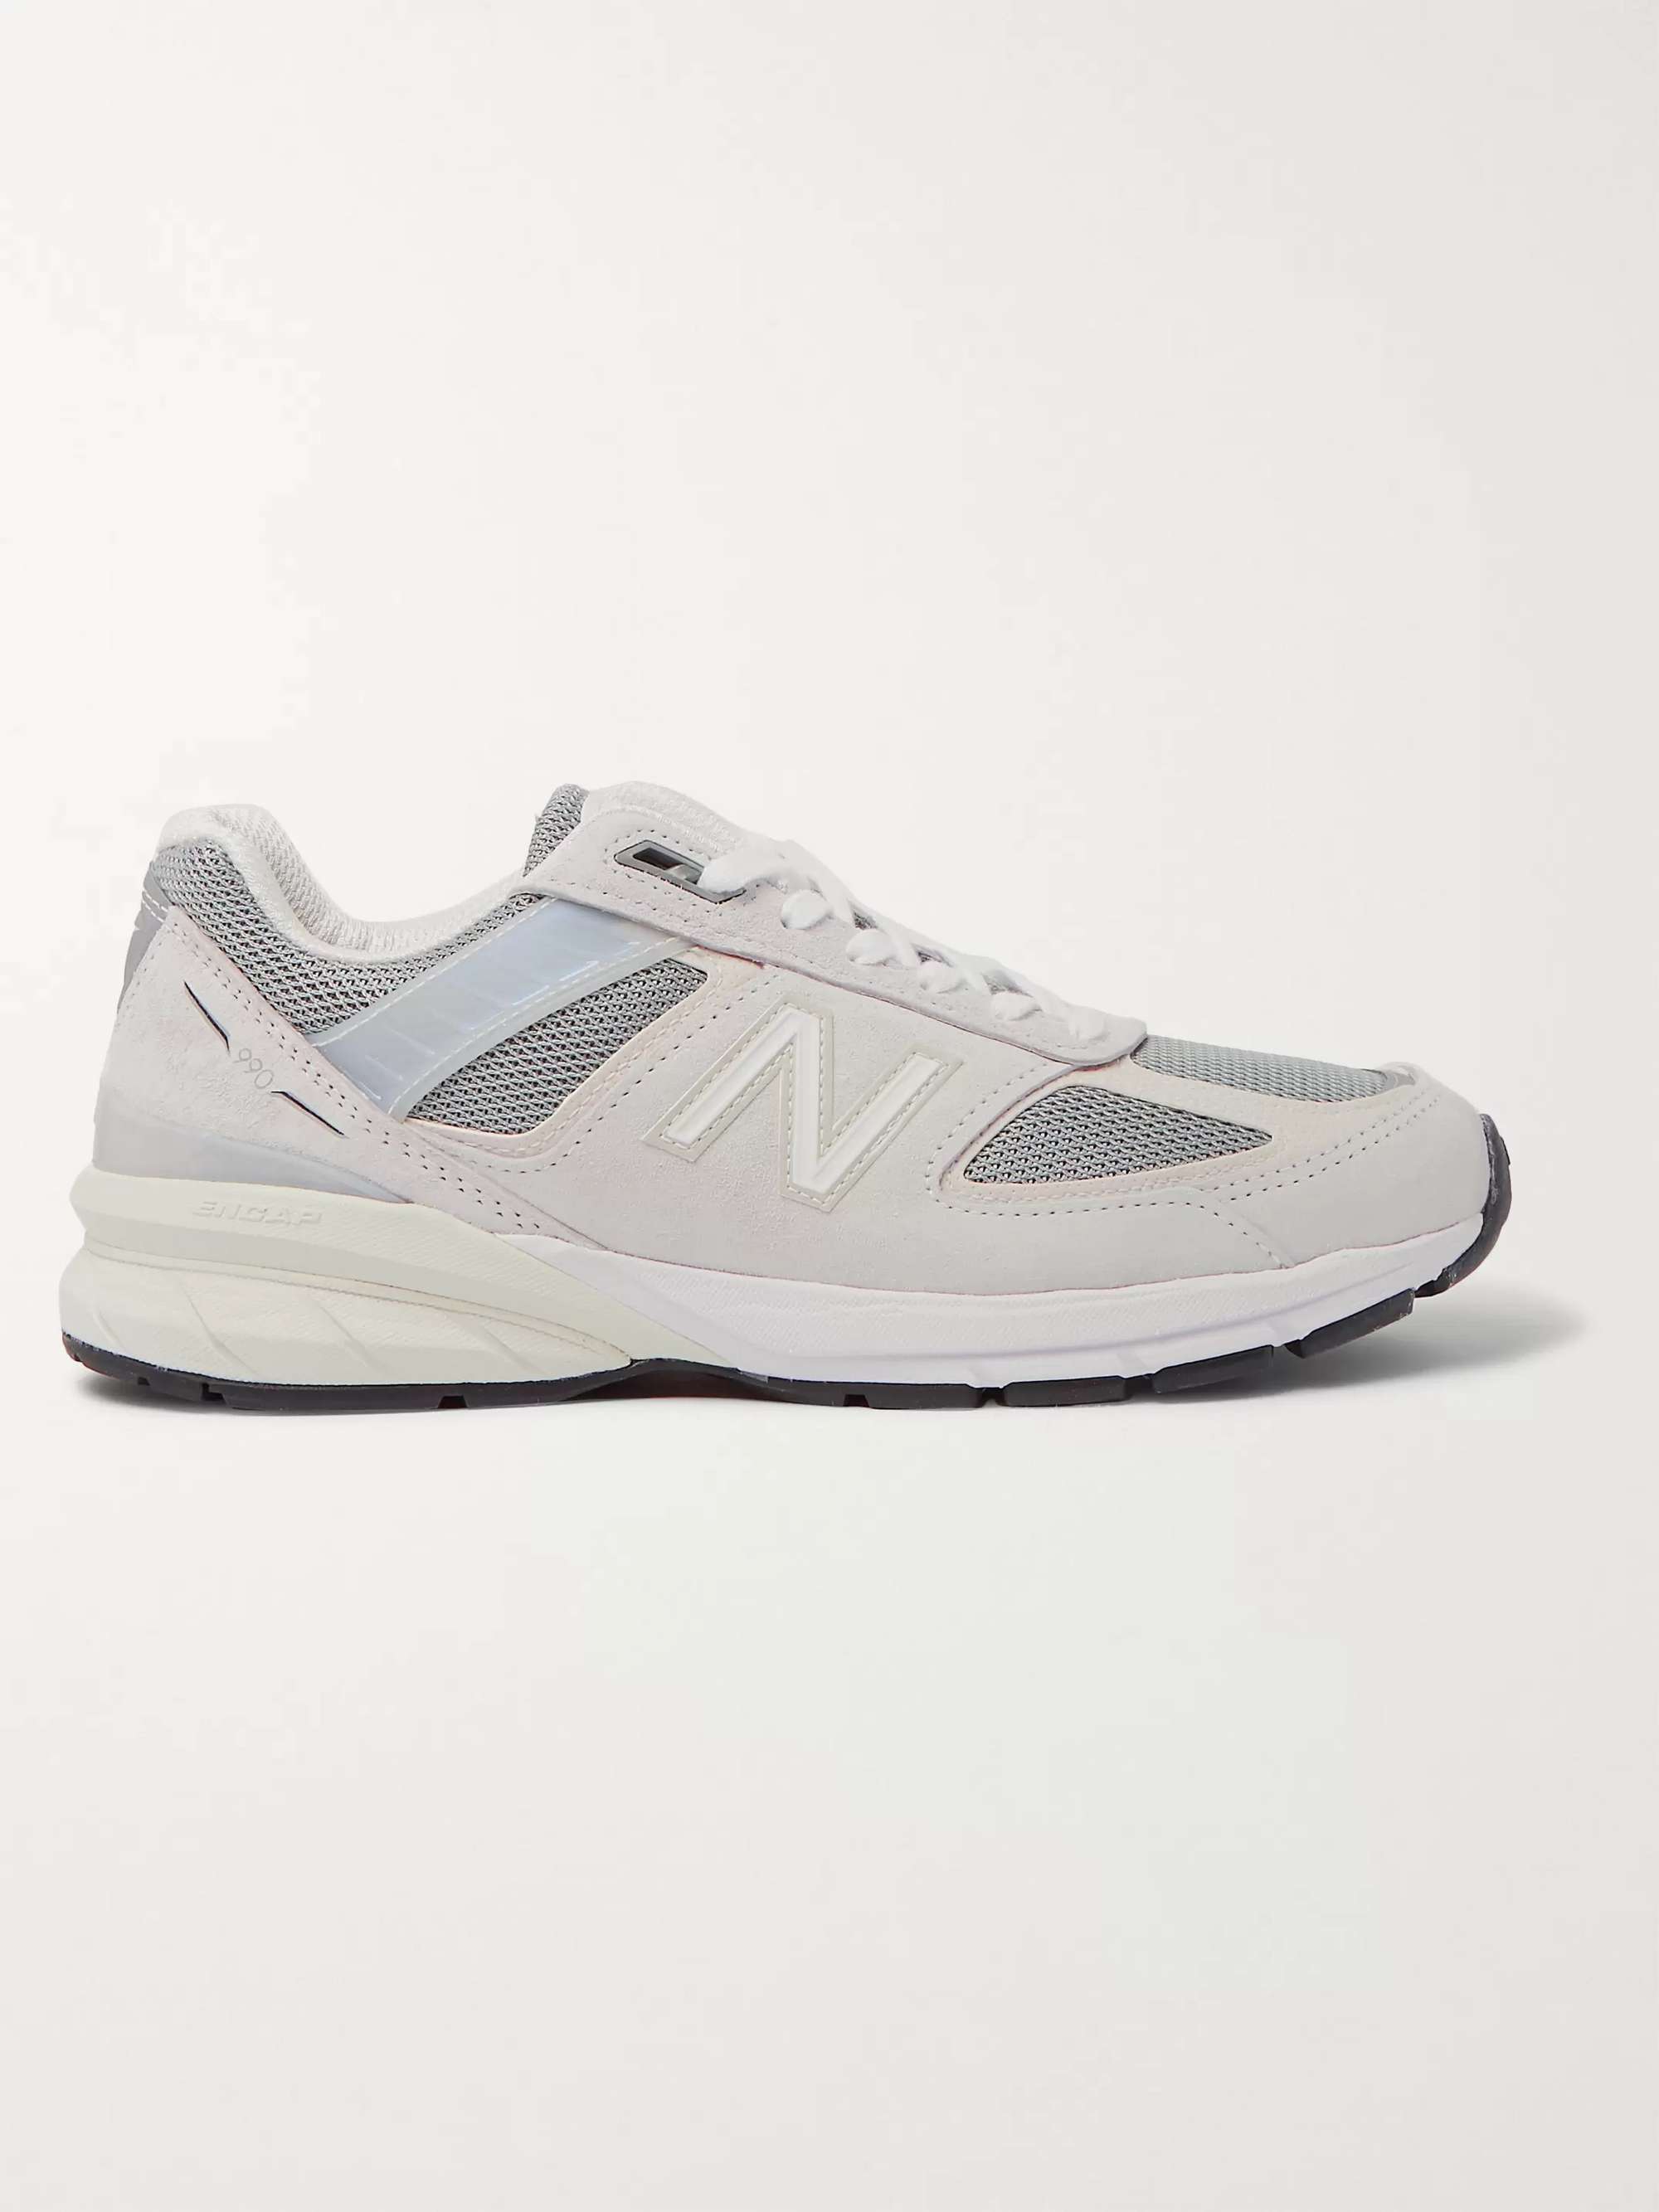 NEW BALANCE M990v5 Rubber-Trimmed Suede and Mesh Sneakers